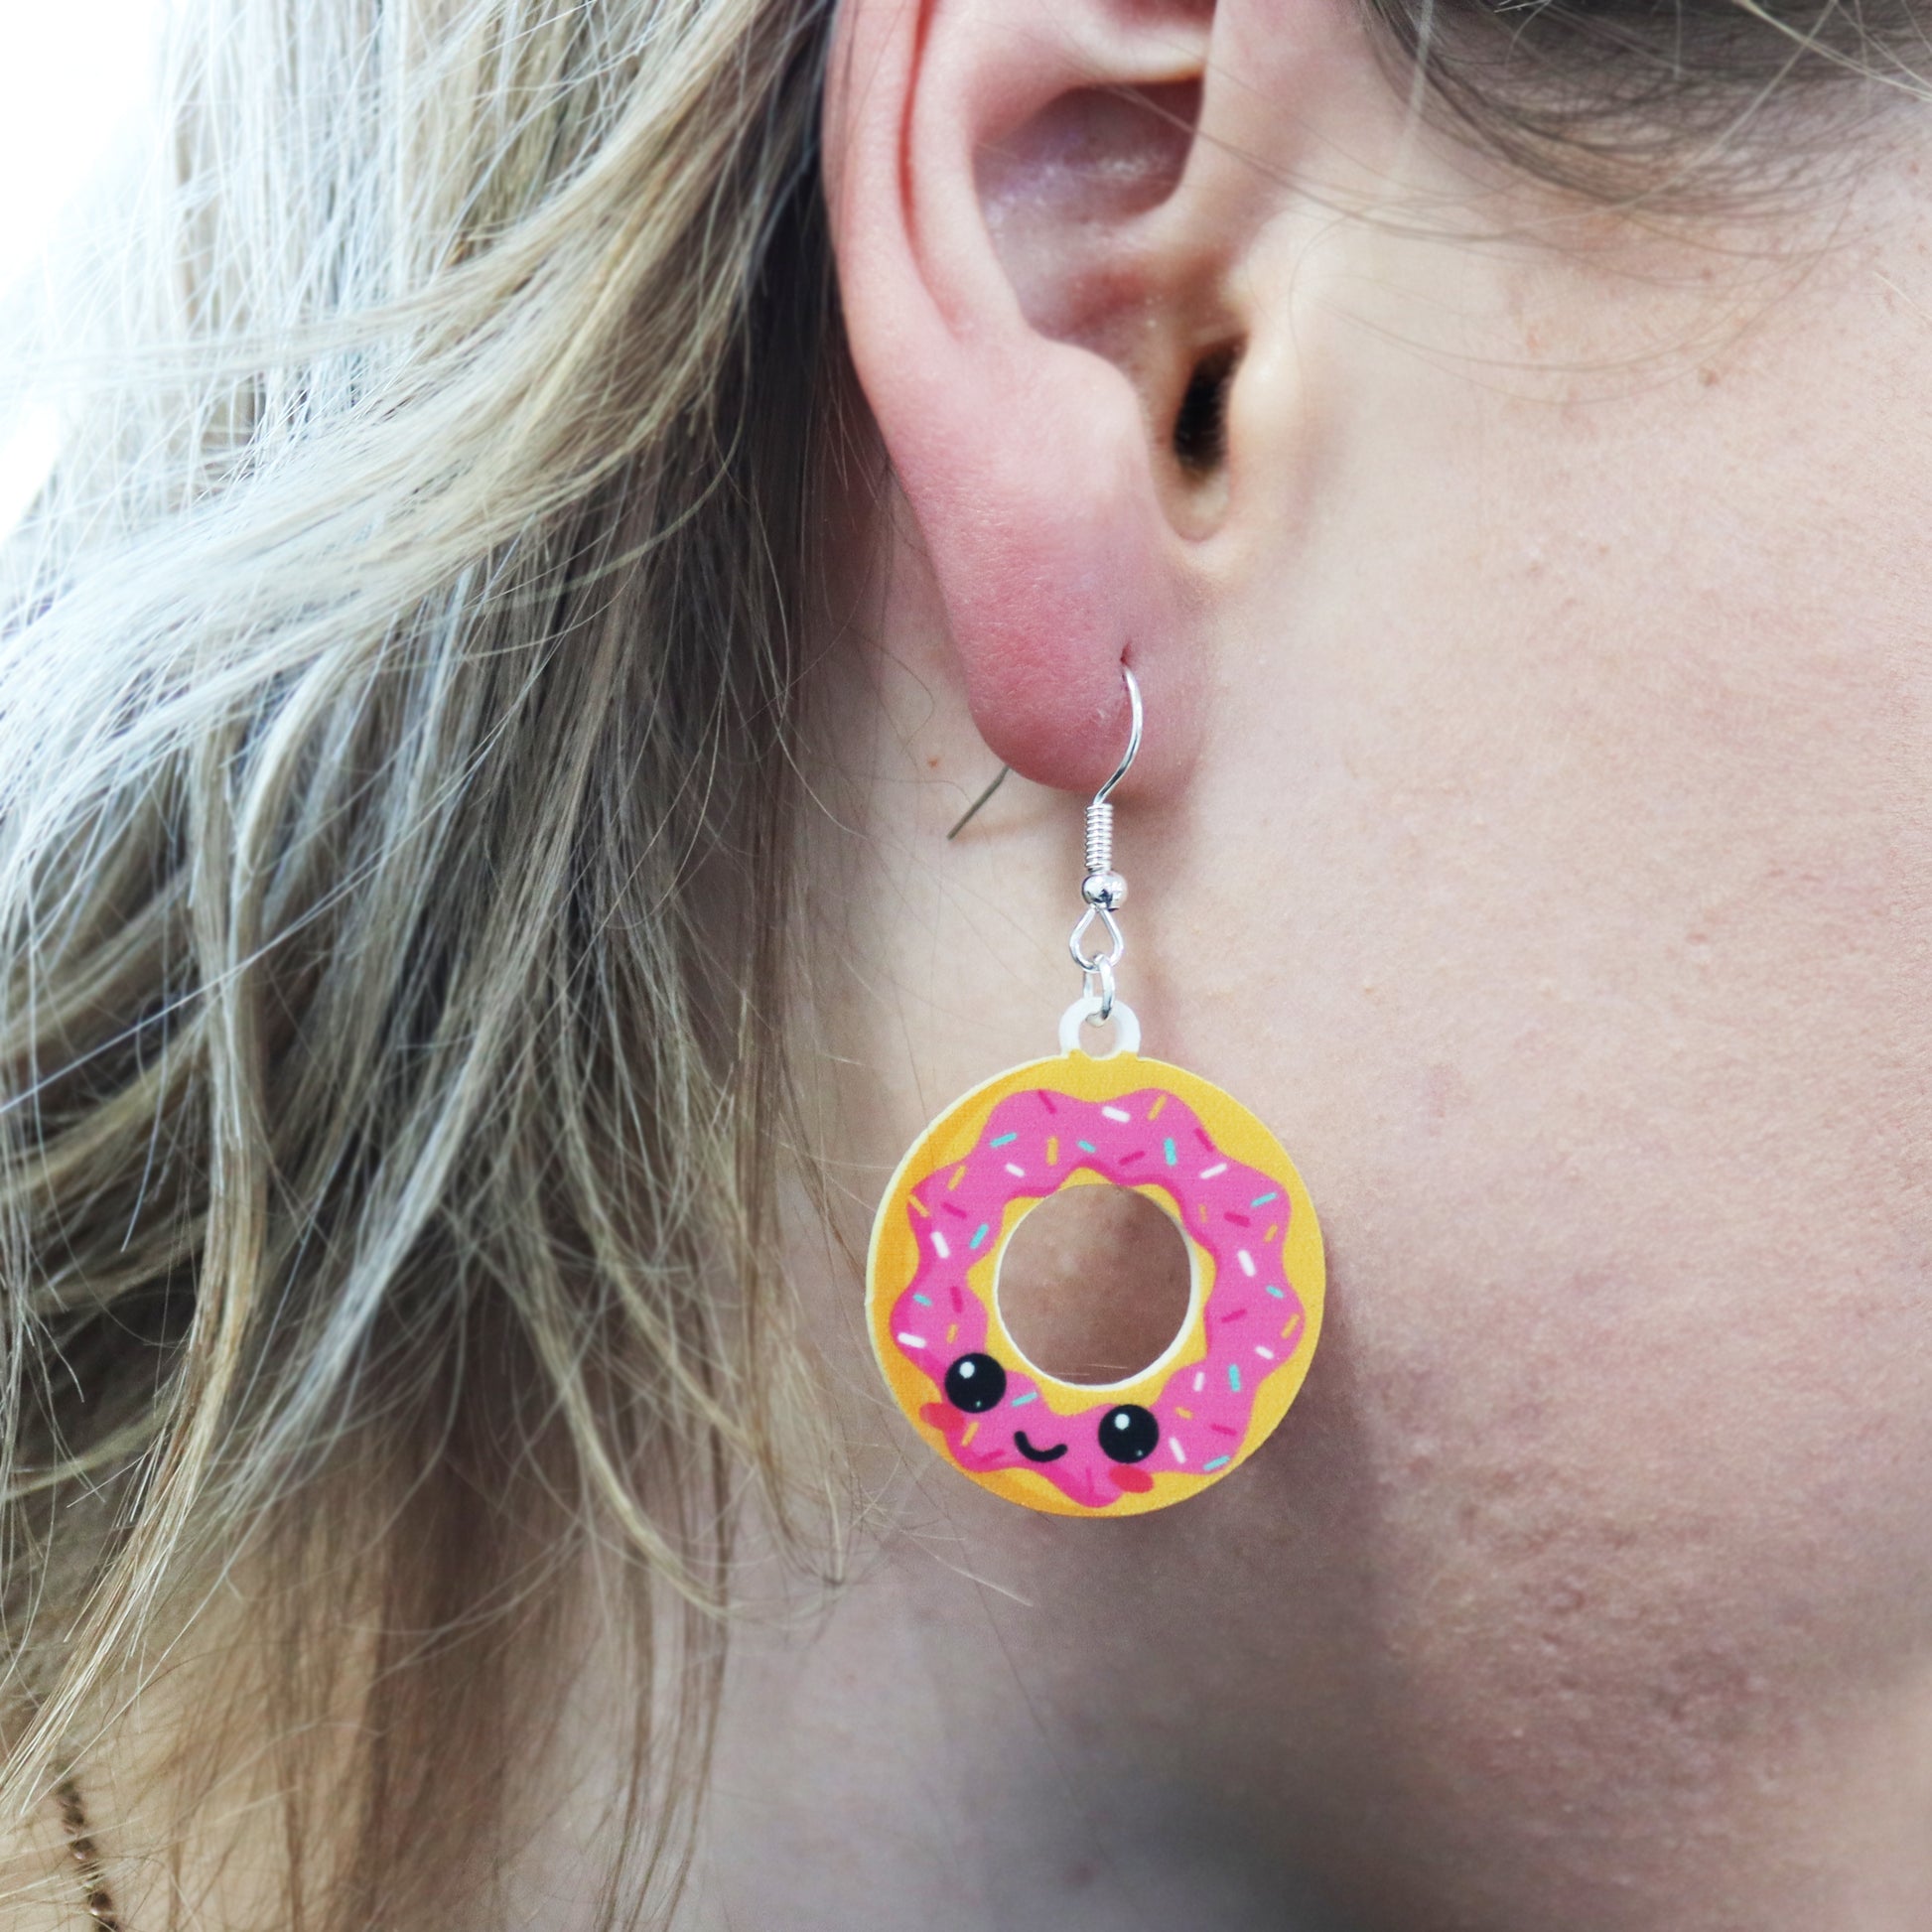 you are the donut to my coffee acrylic earrings handmade in UK donut earring being worn